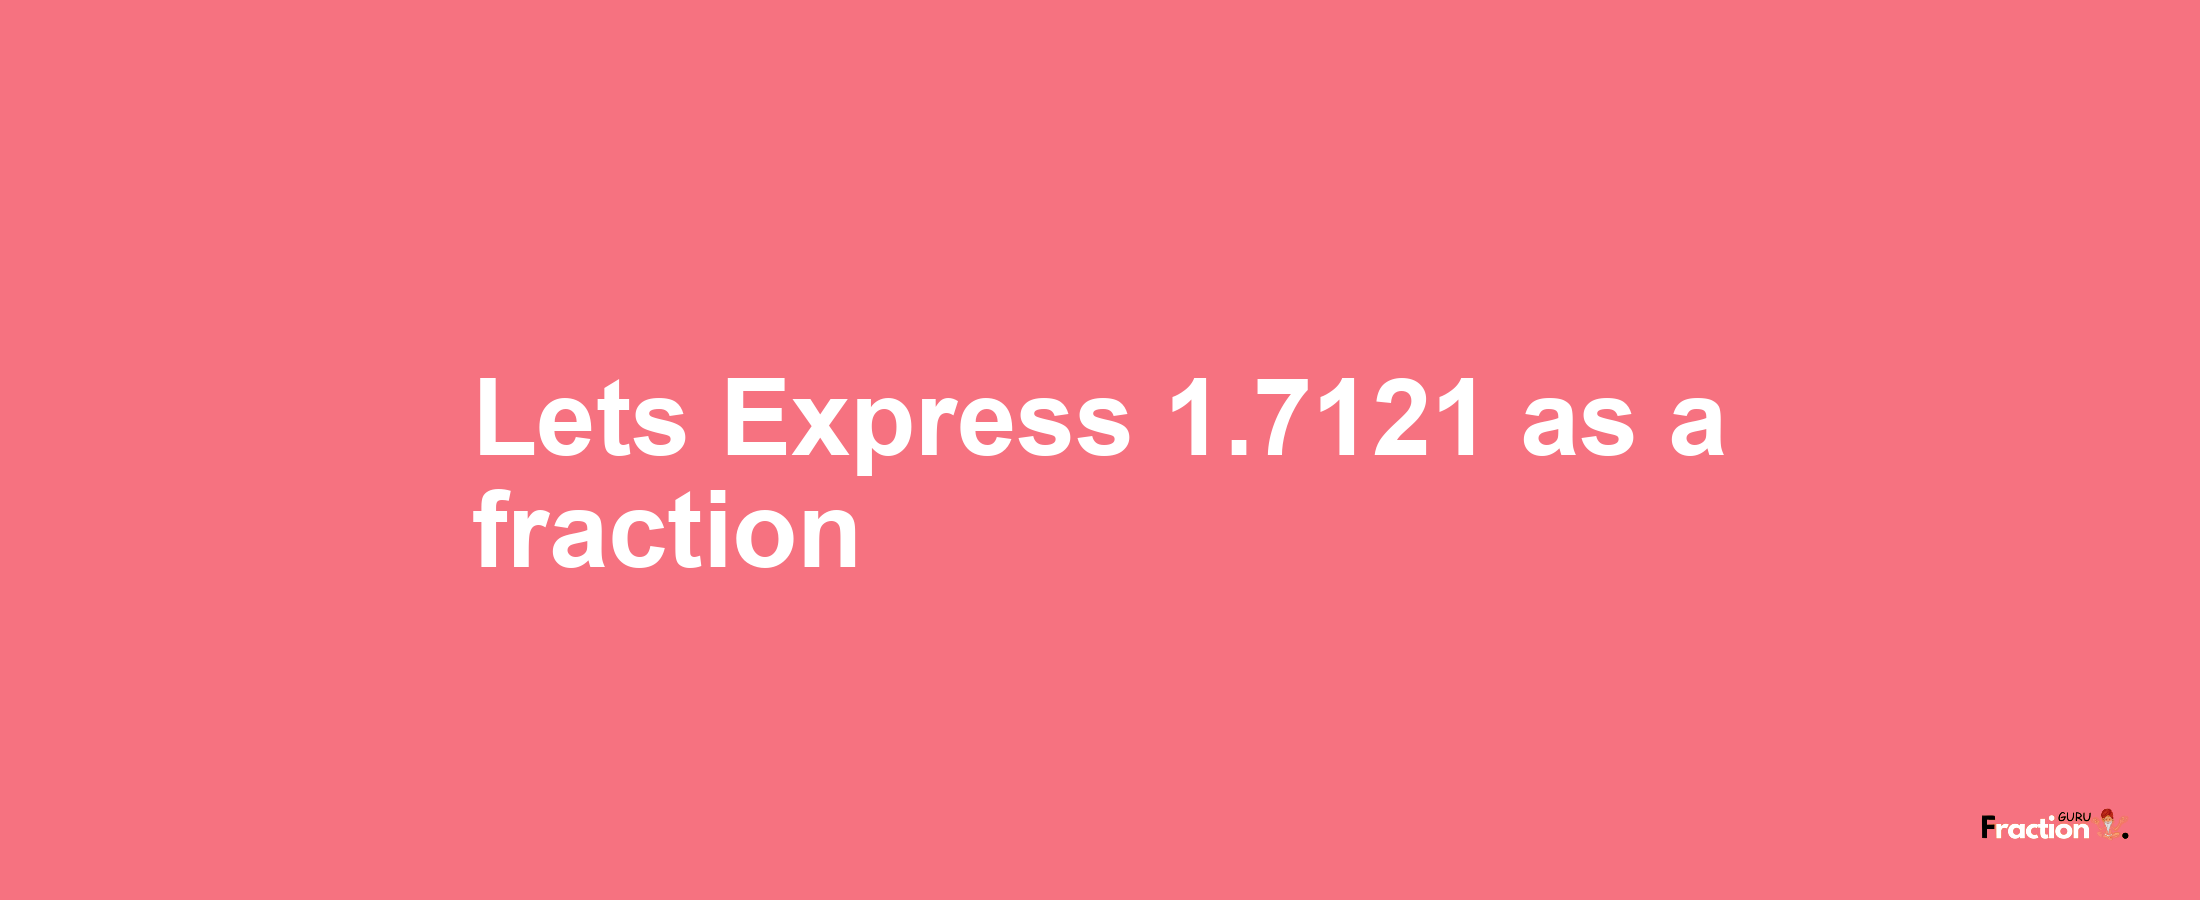 Lets Express 1.7121 as afraction